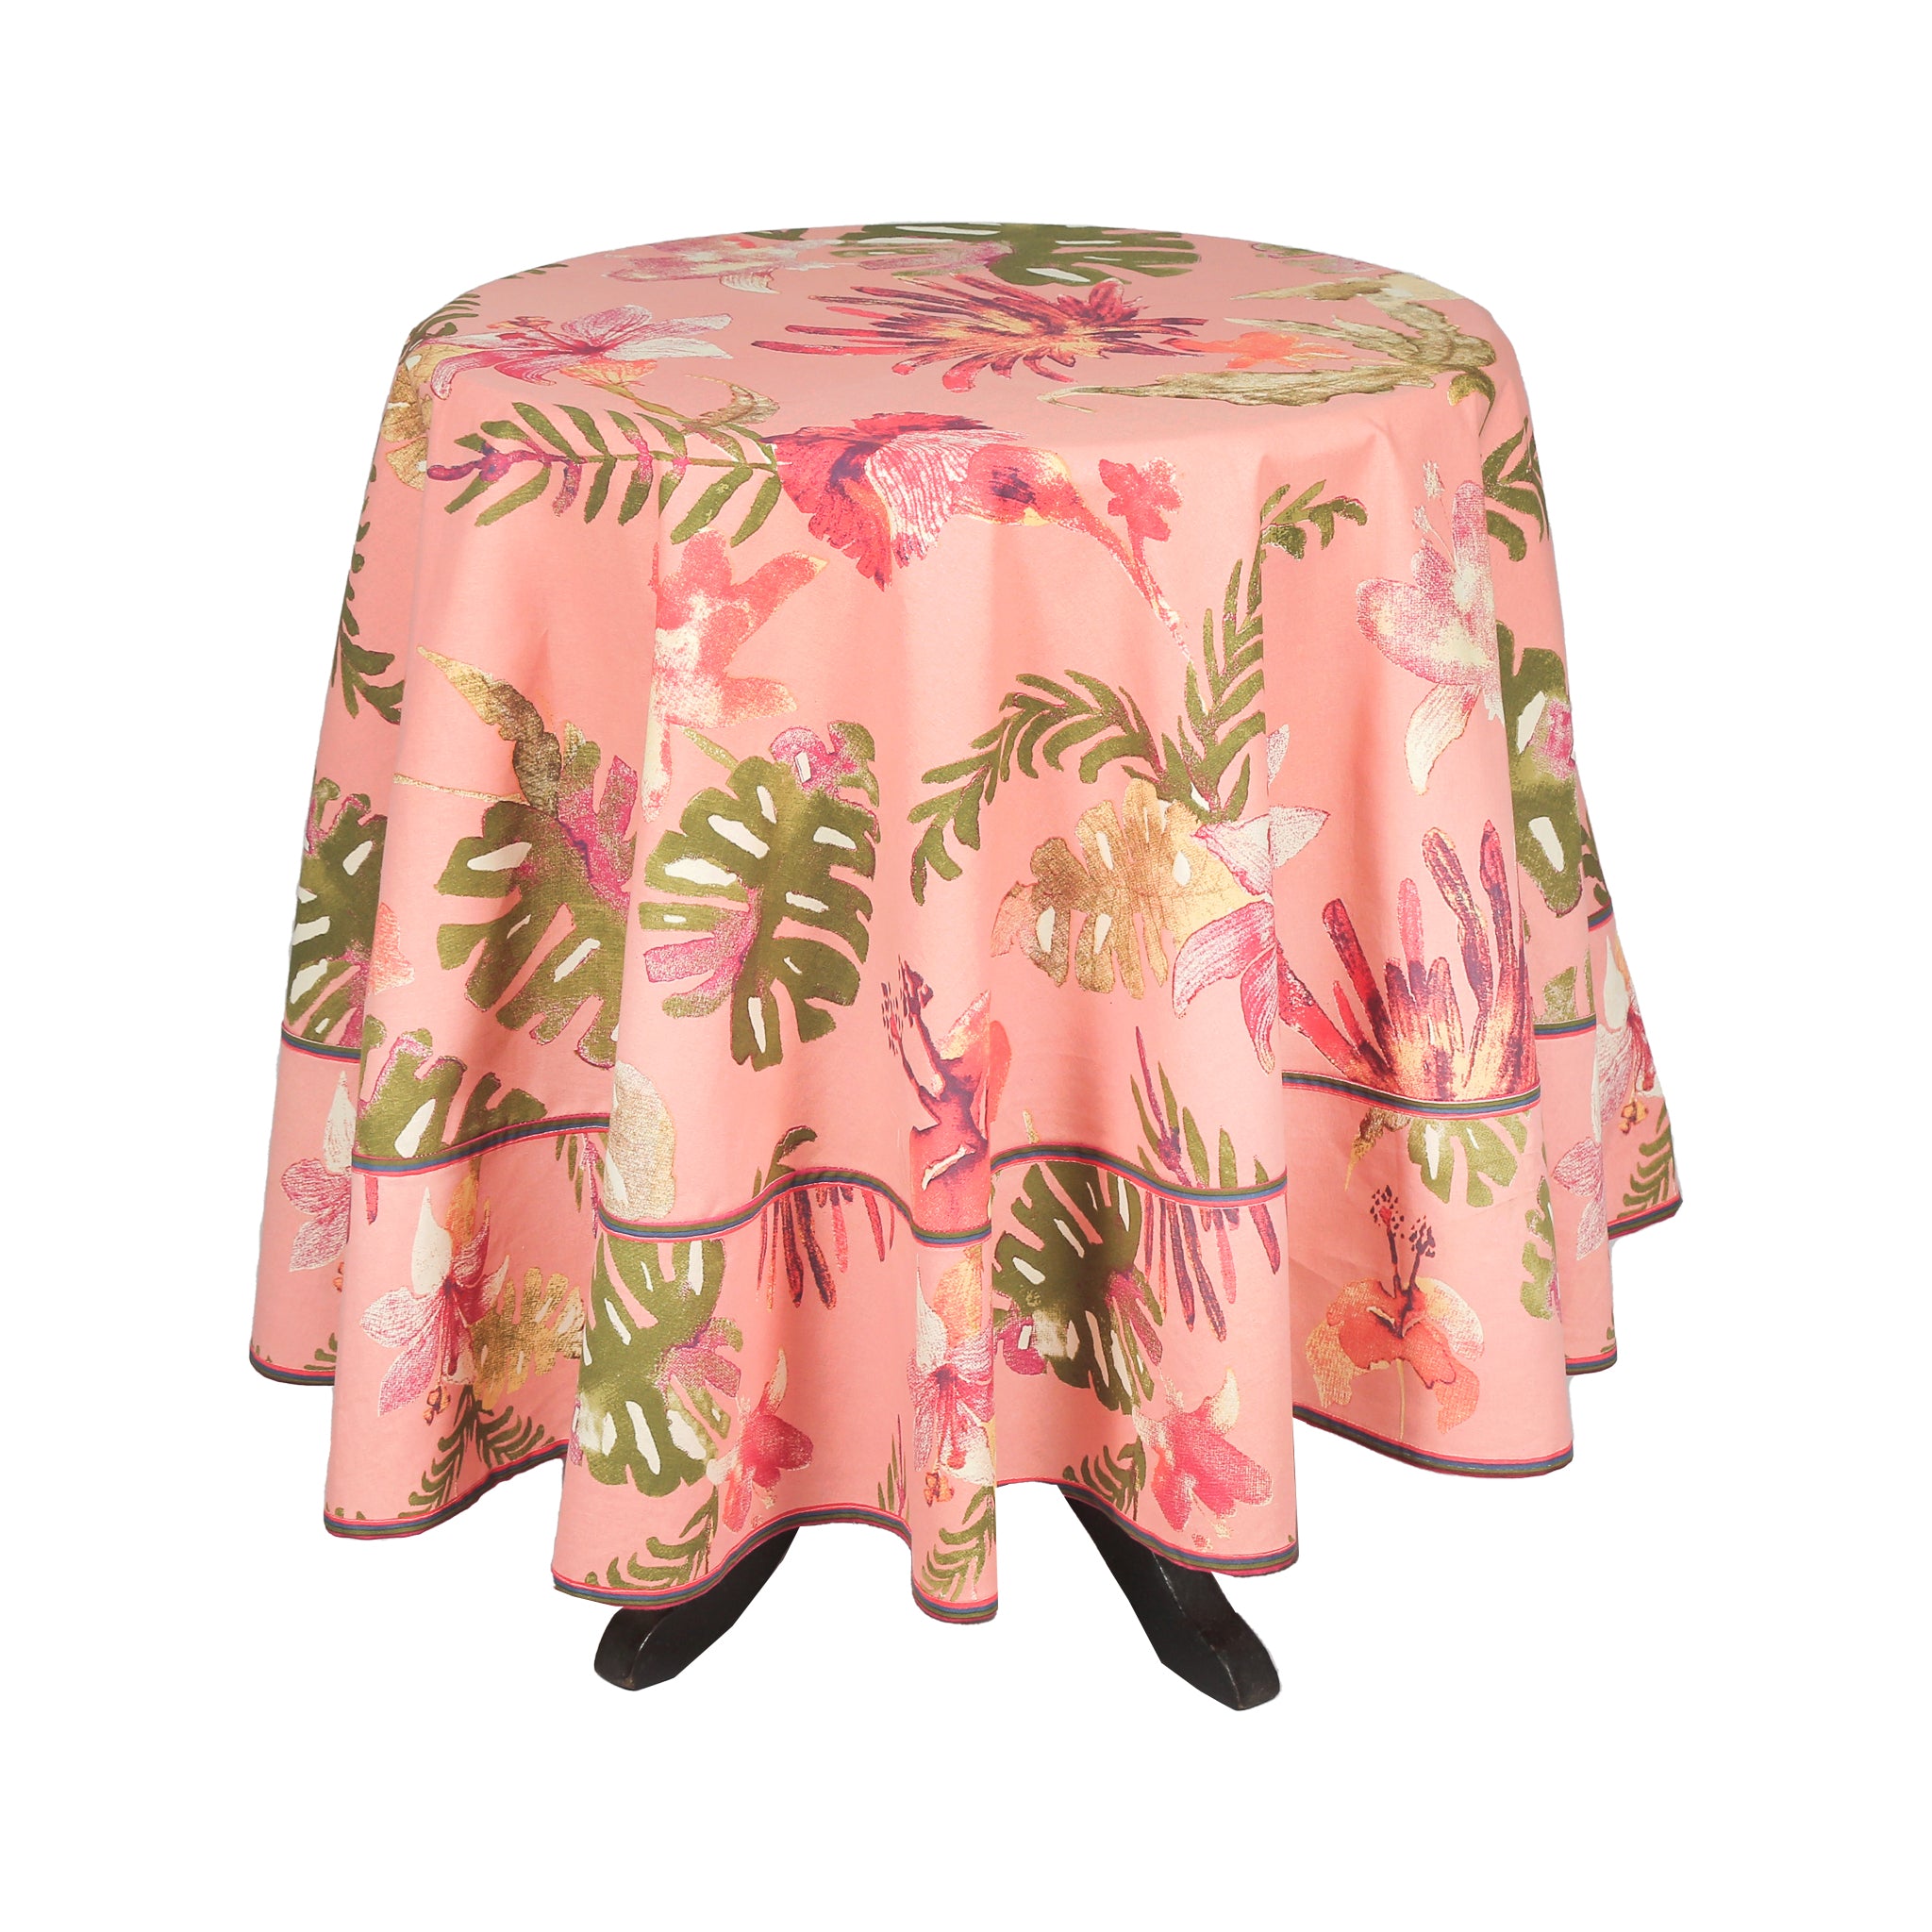 Round Table Cloth - Victoria Begonia